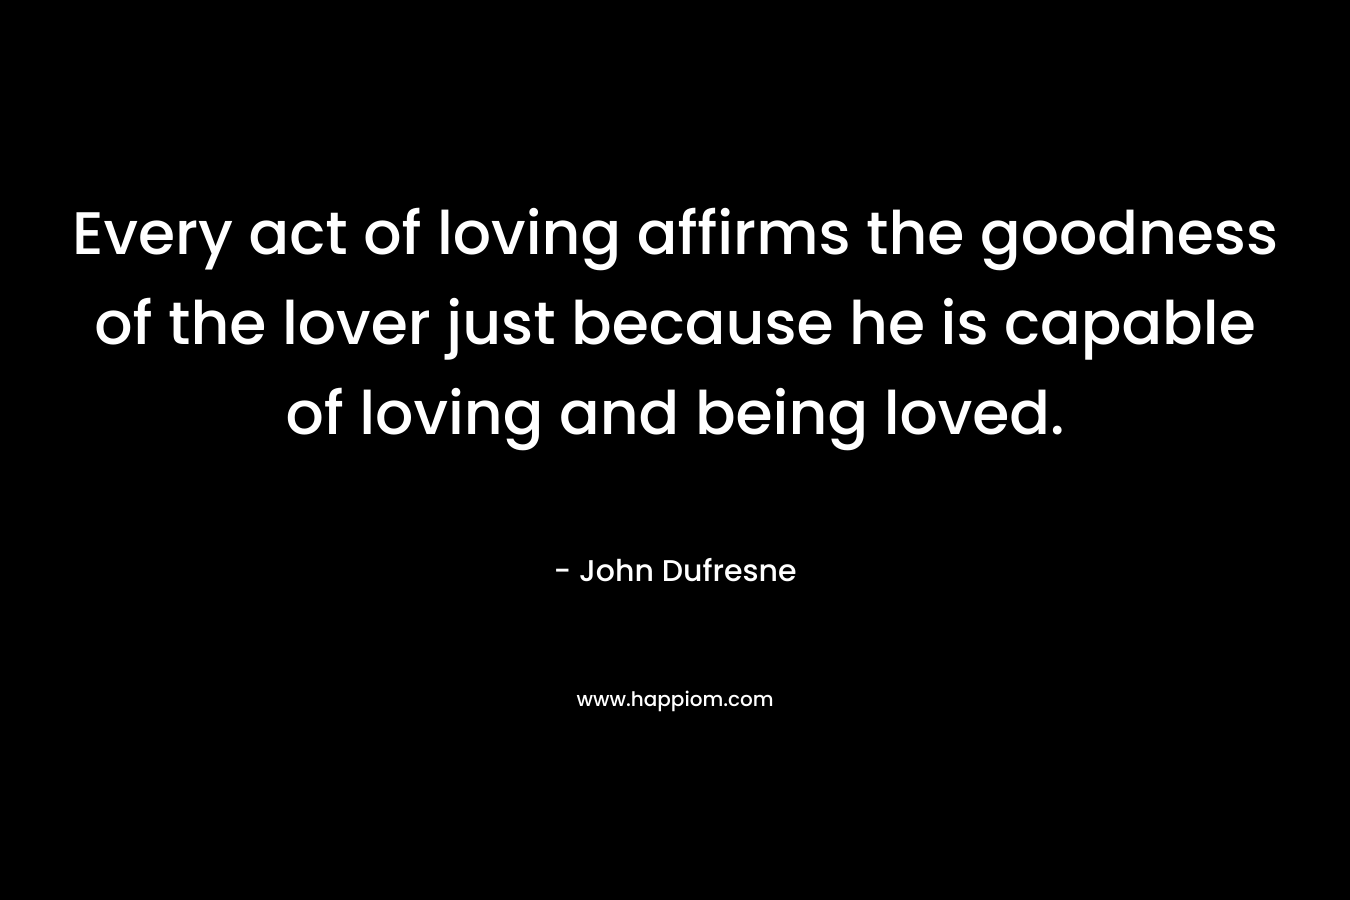 Every act of loving affirms the goodness of the lover just because he is capable of loving and being loved.